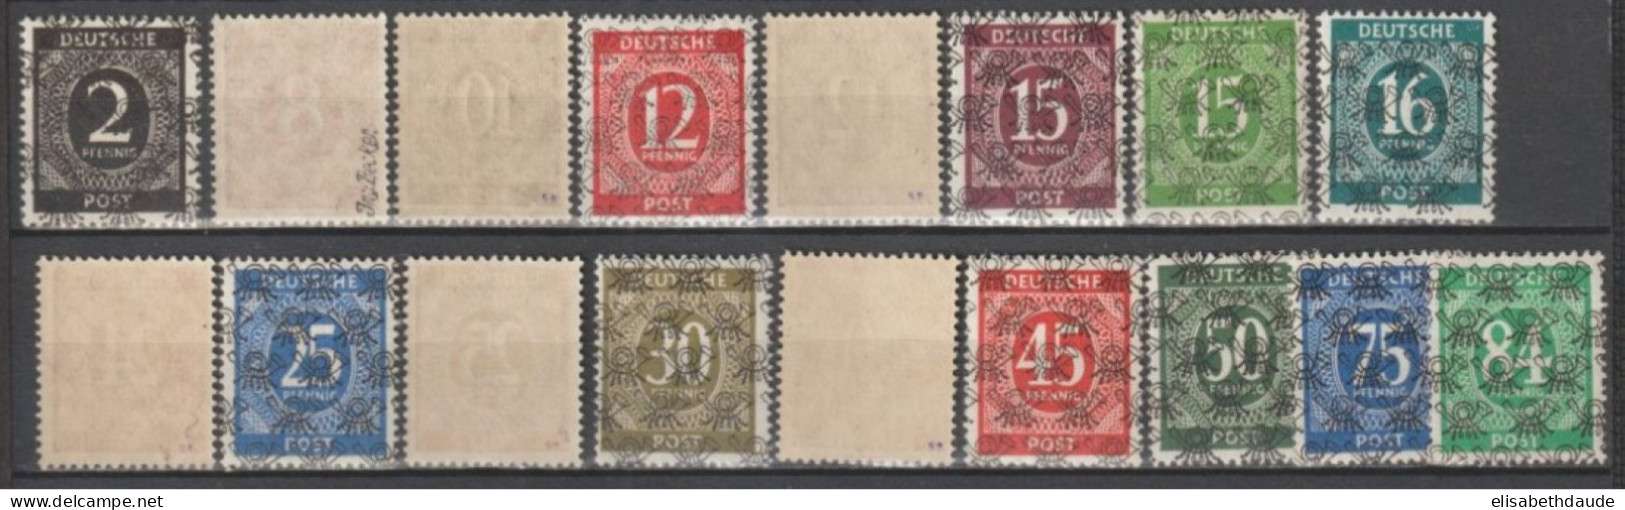 ALLEMAGNE BIZONE - SERIE COMPLETE RARE YVERT N°20A/20S I ** MNH - COTE = 900 EUR. - SIGNES ! - Neufs